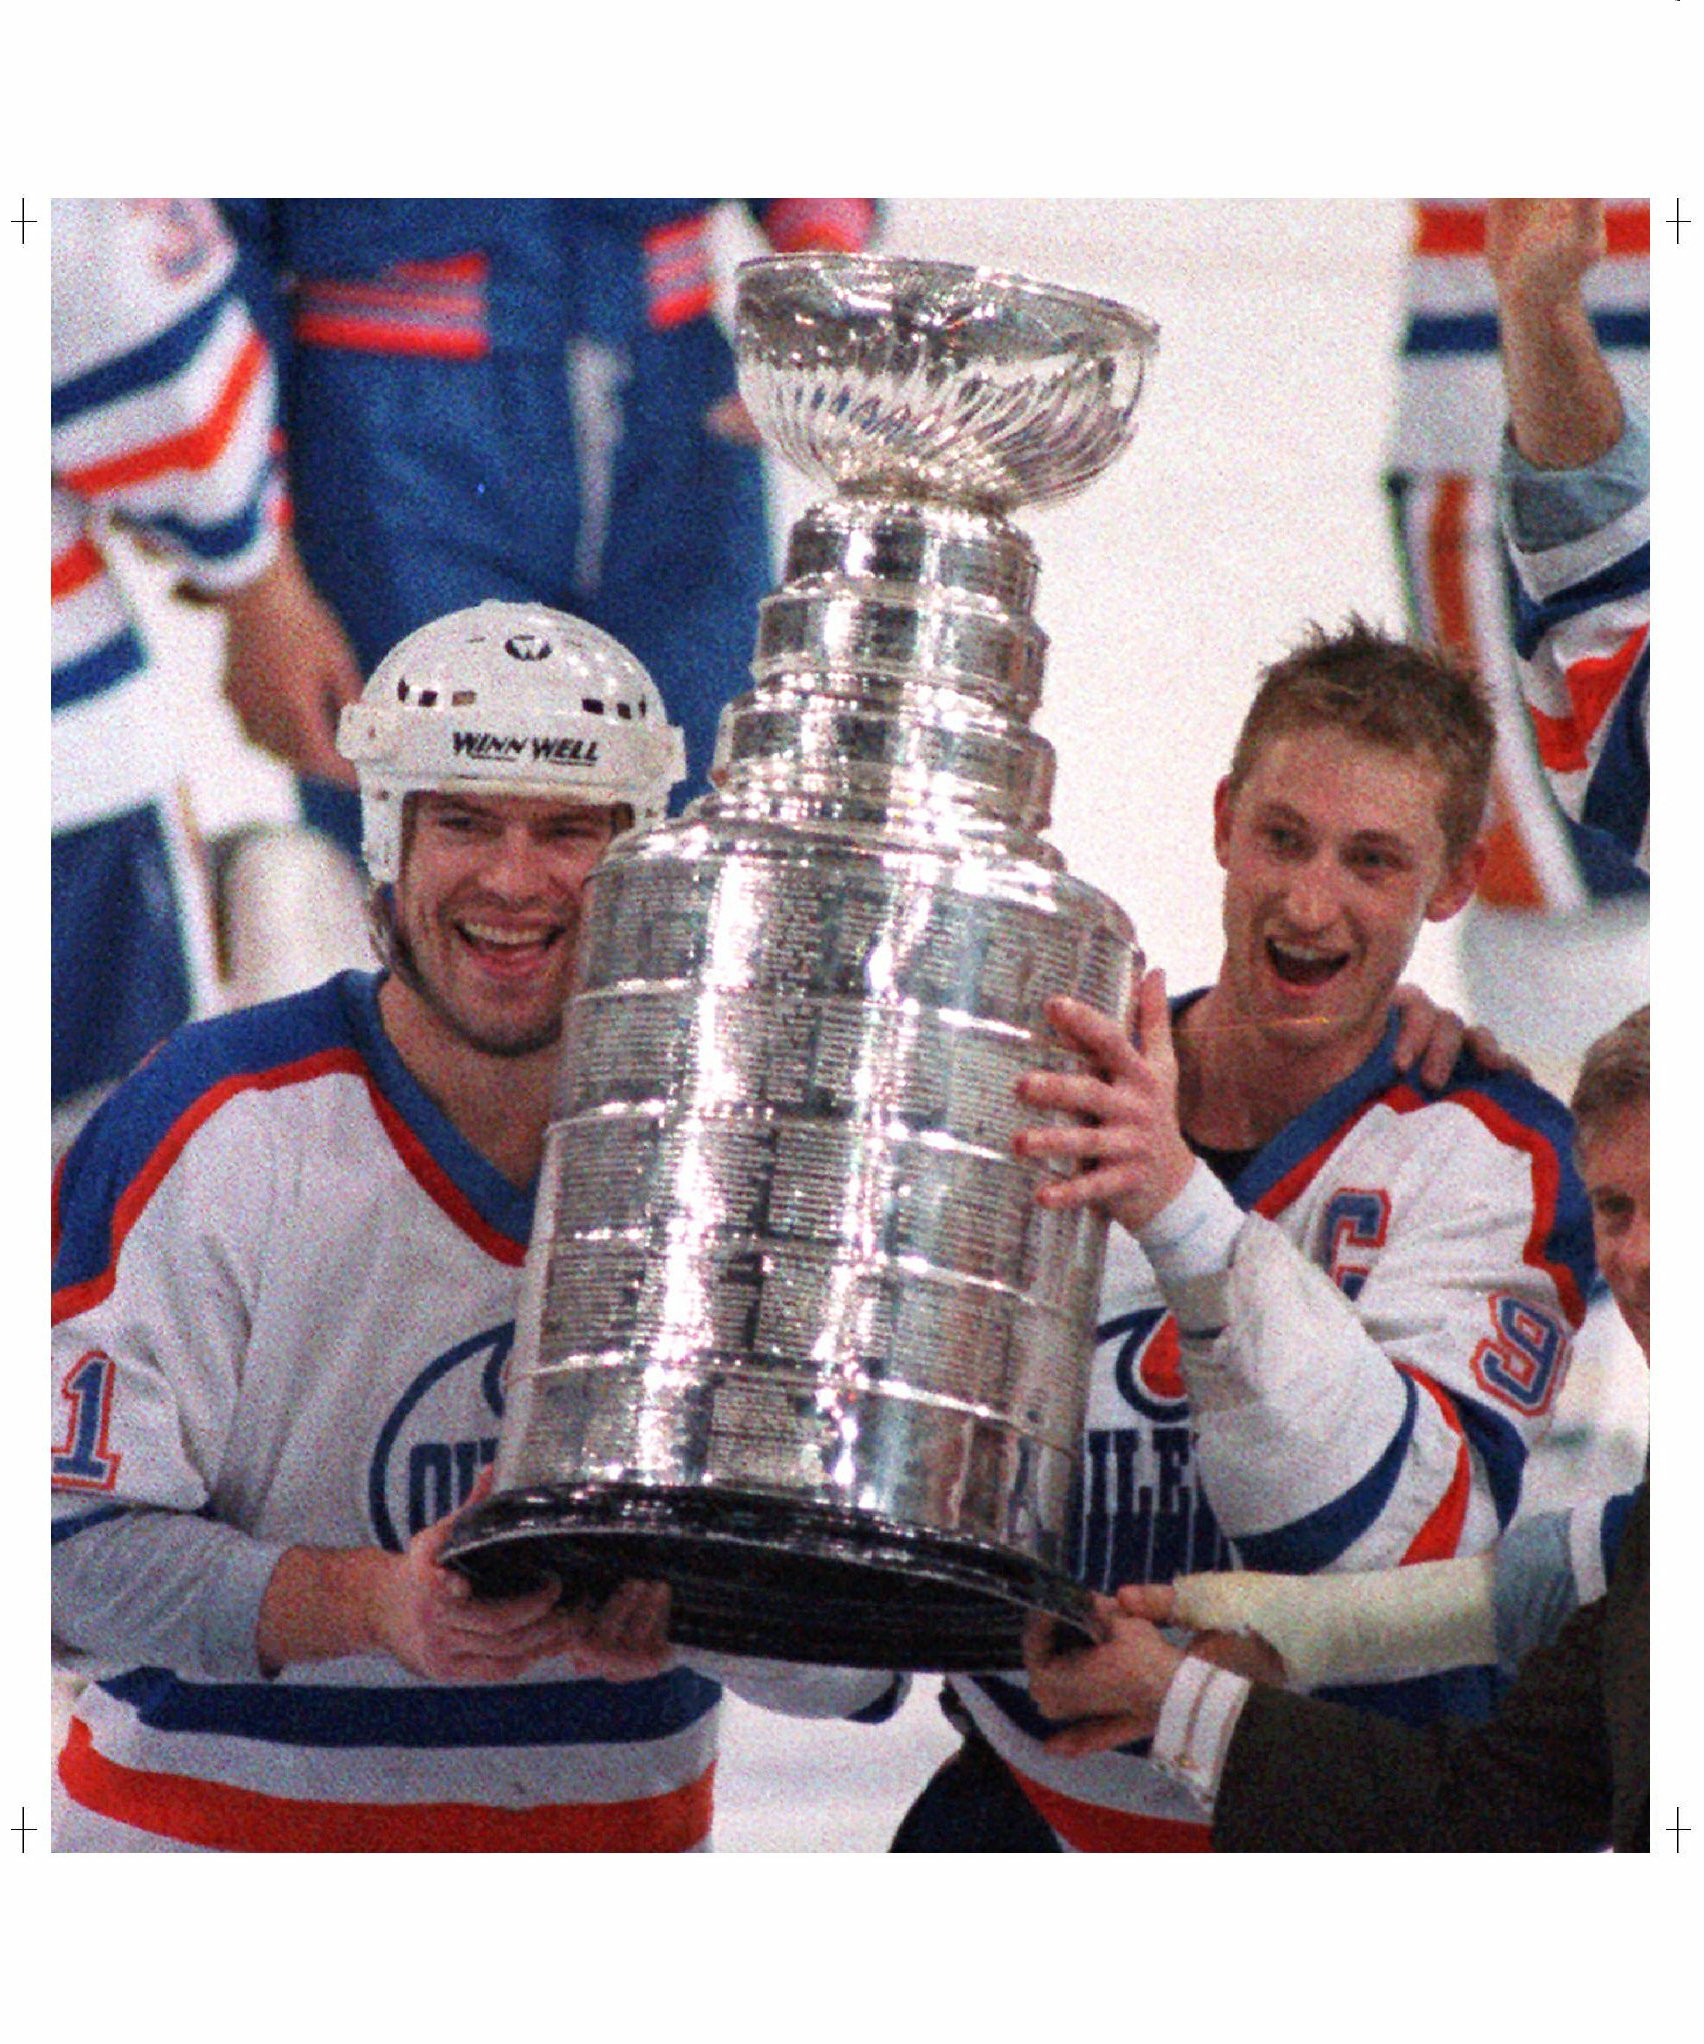 Champagne-stained Gretzky jersey sells for a record-high at